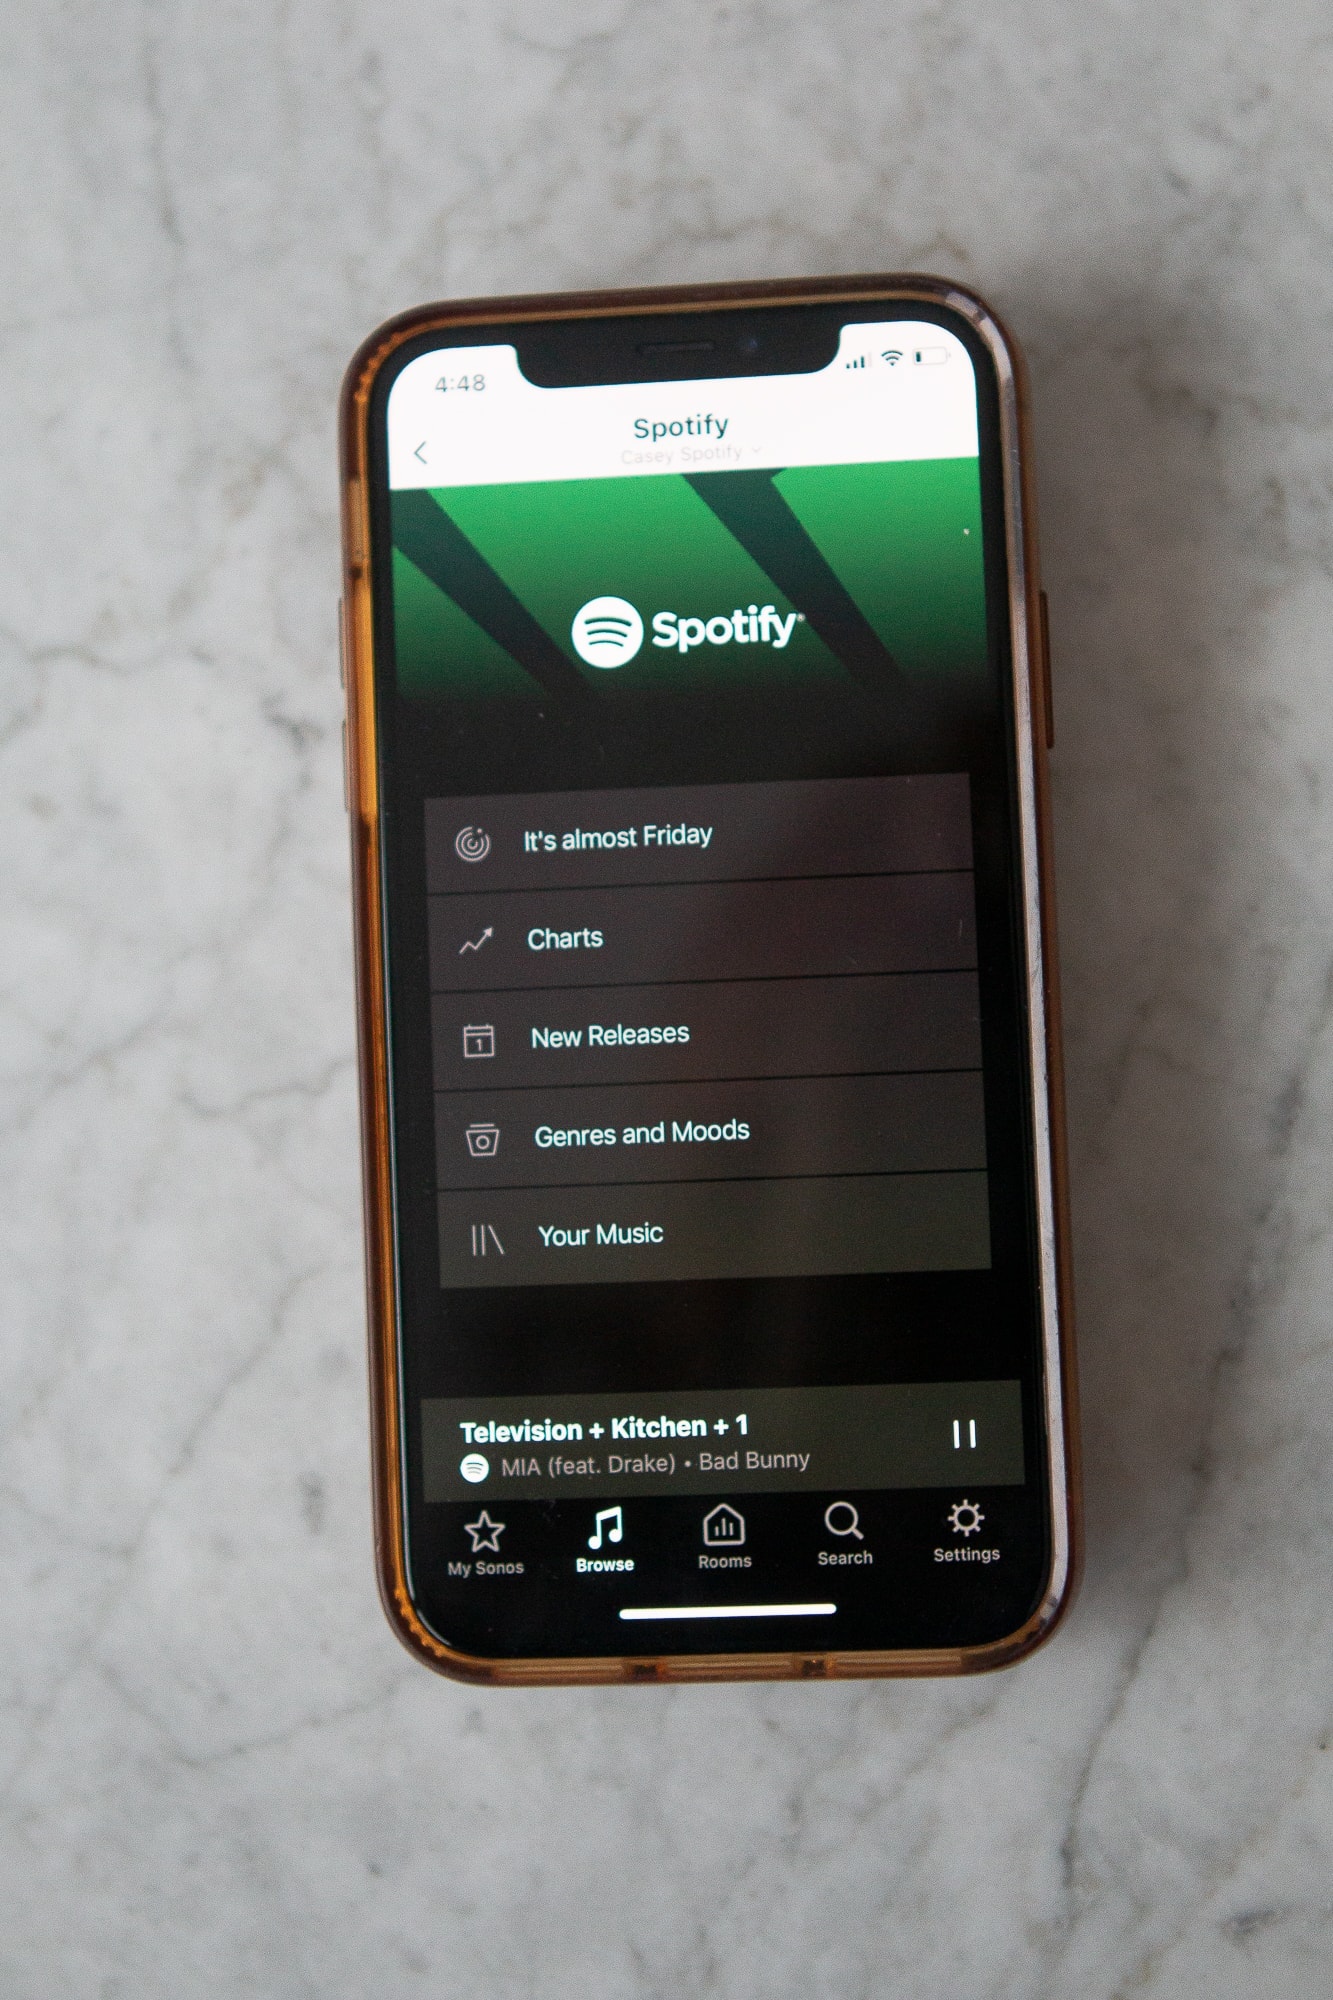 Using the sonos app for Spotify